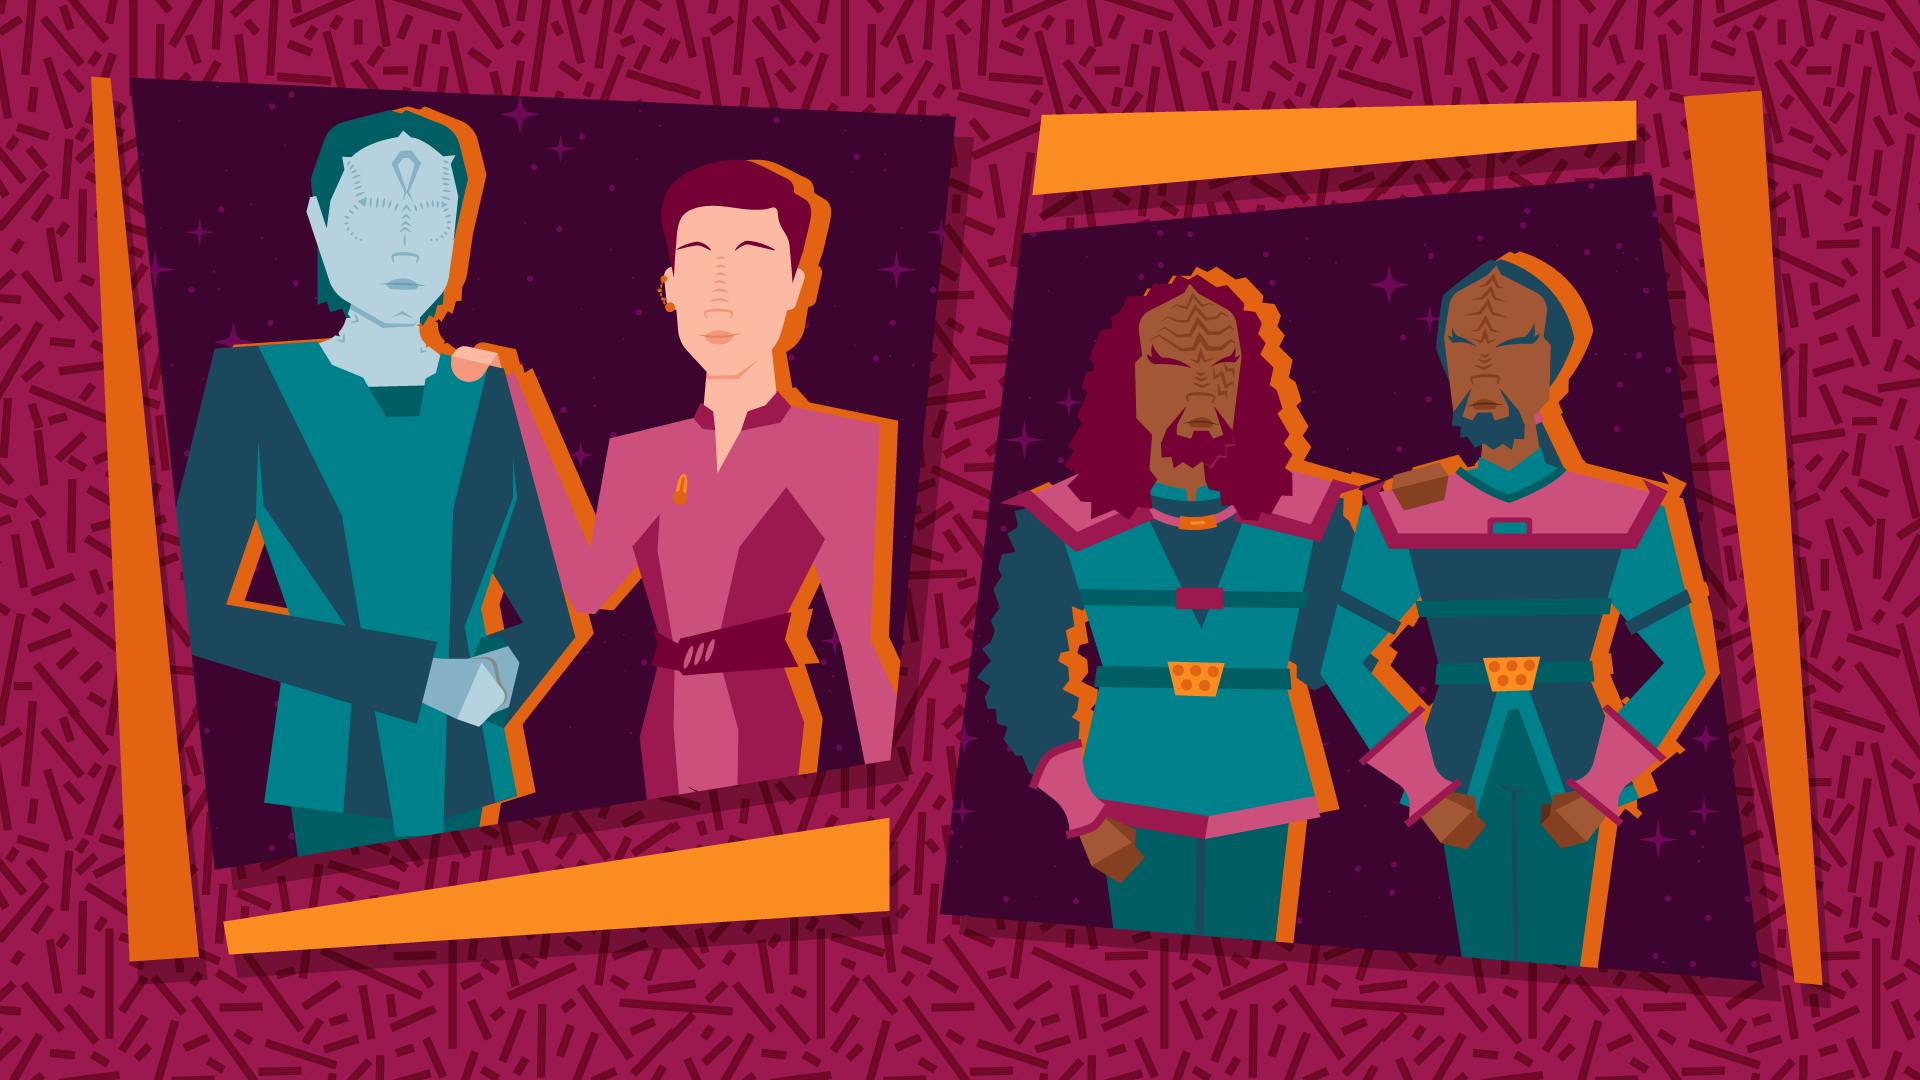 Graphic illustration of Kira Nerys standing side-by-side with Tekeny Ghemor with her hand on his shoulder, and Martok and Worf standing side-by-side with the general's hand on Worf's shoulder